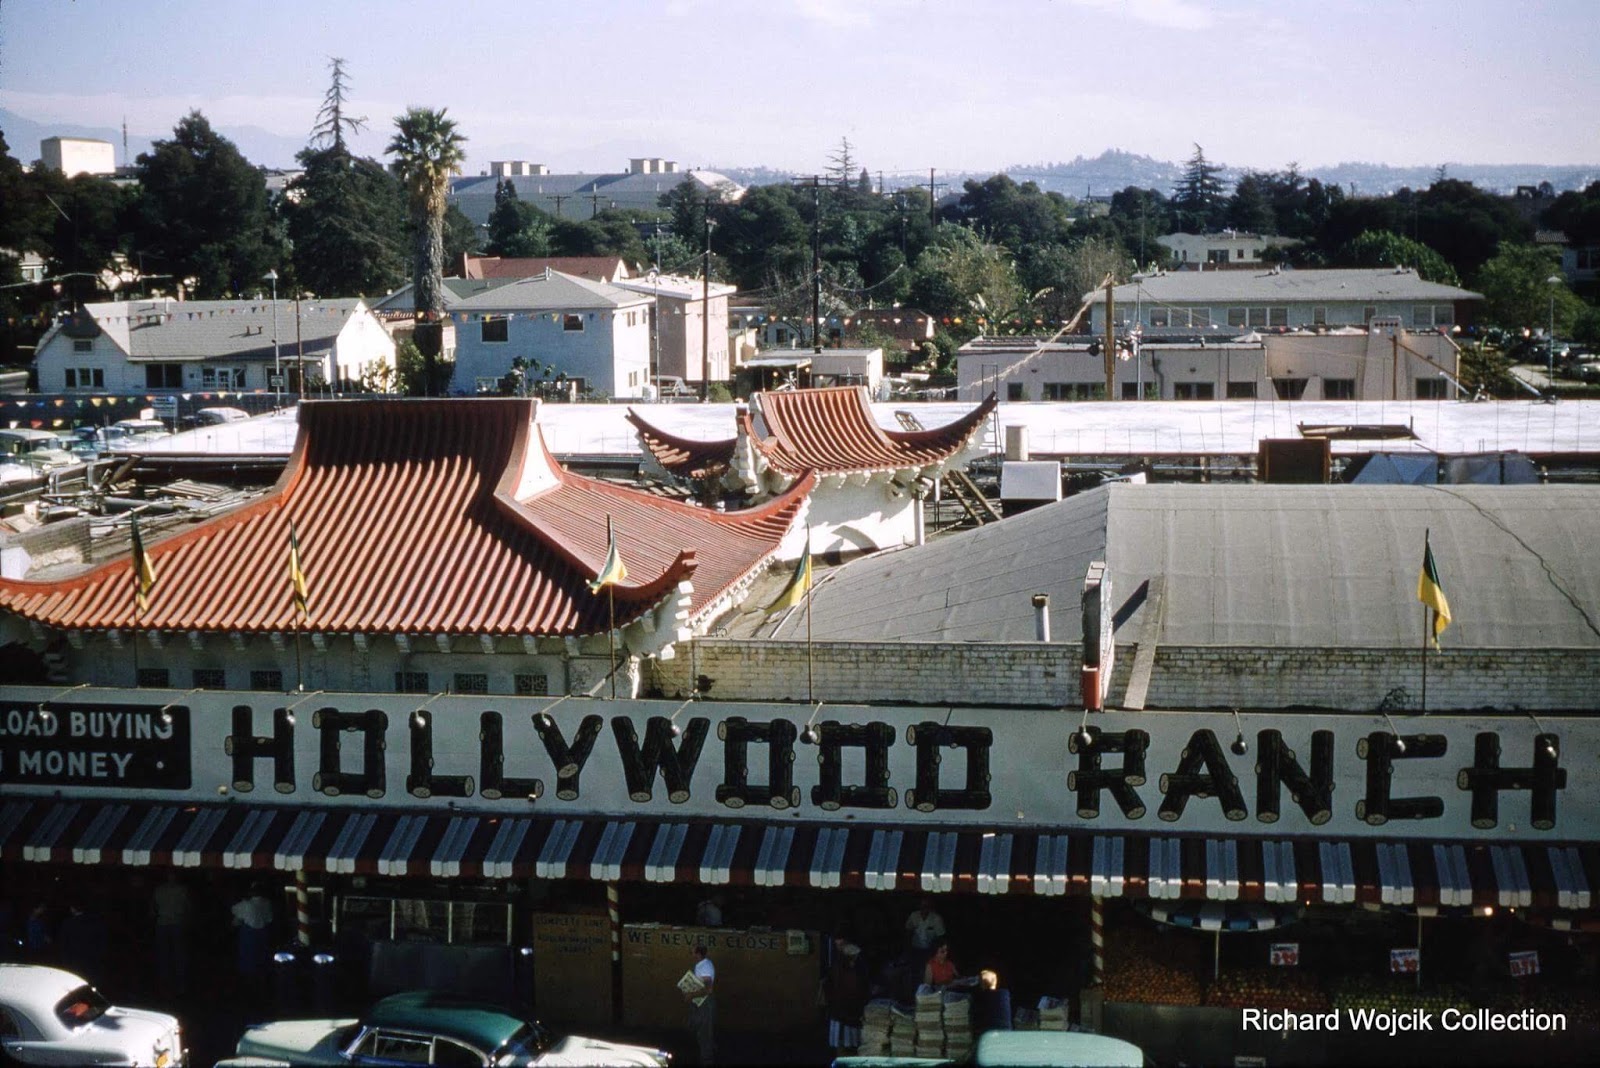 The Hollywood Ranch Market